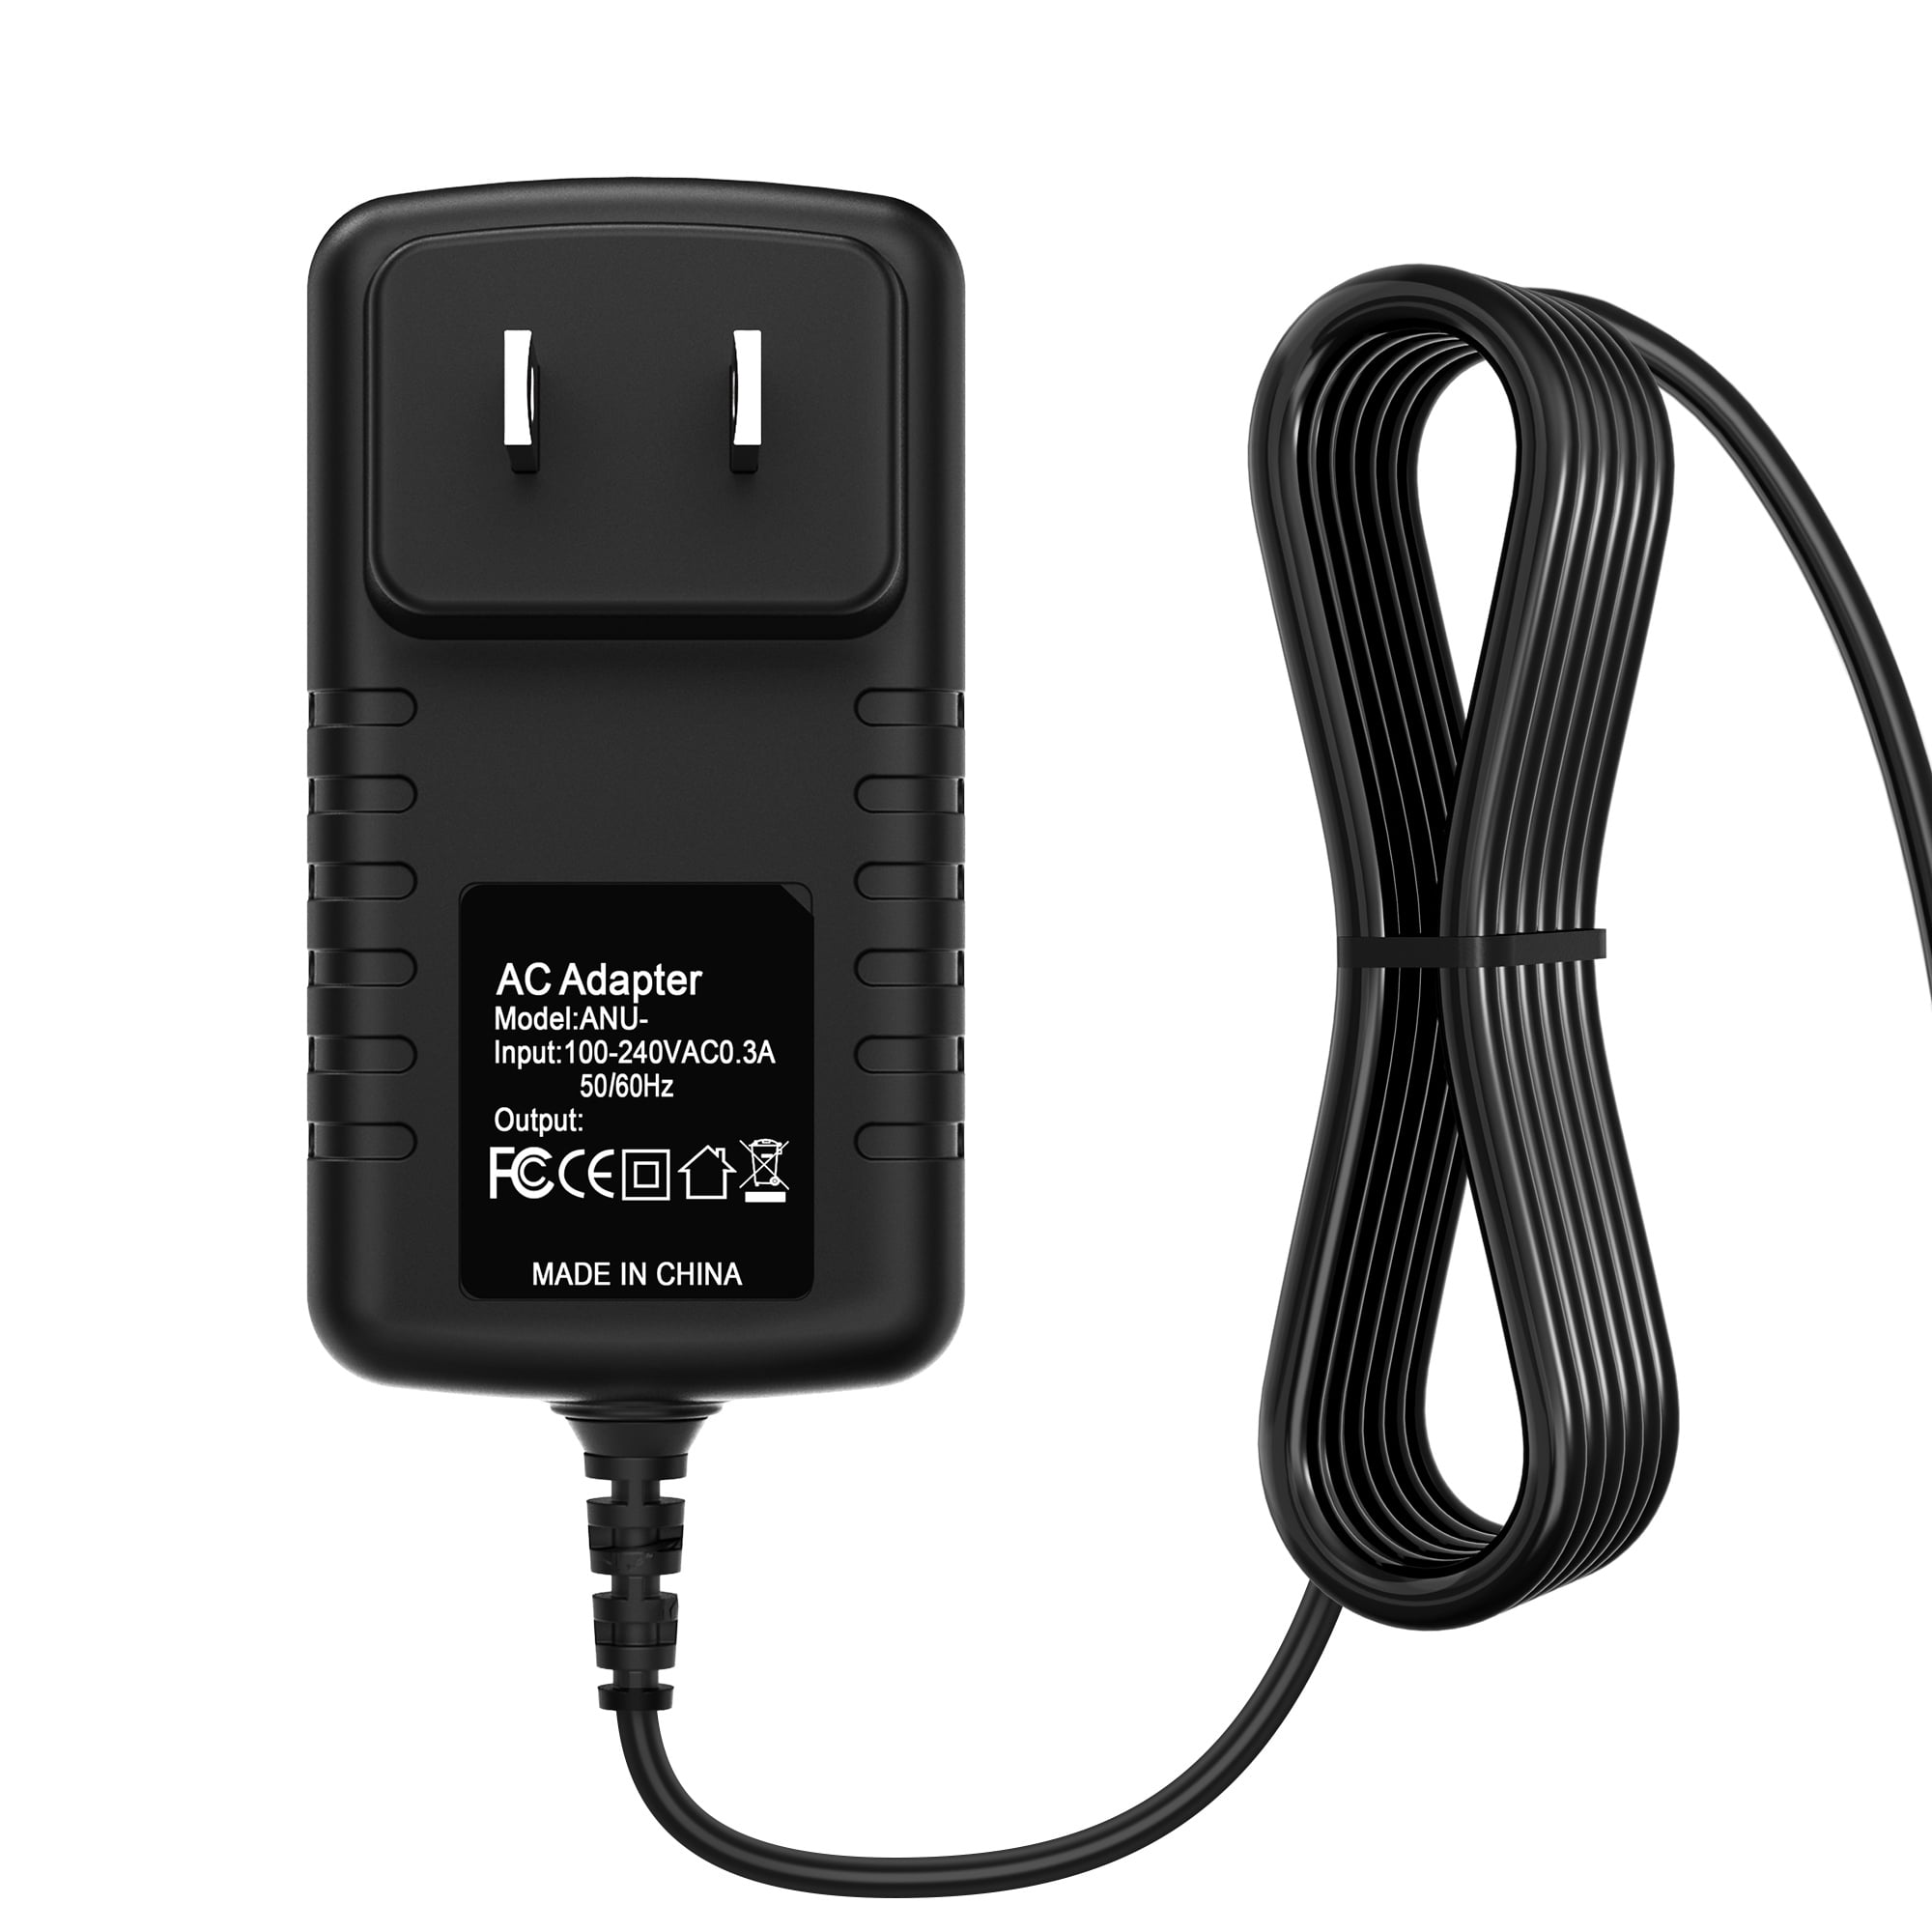 K-MAINS AC Adapter Replacement for Yamaha Arius YDP-143 YDP-143R